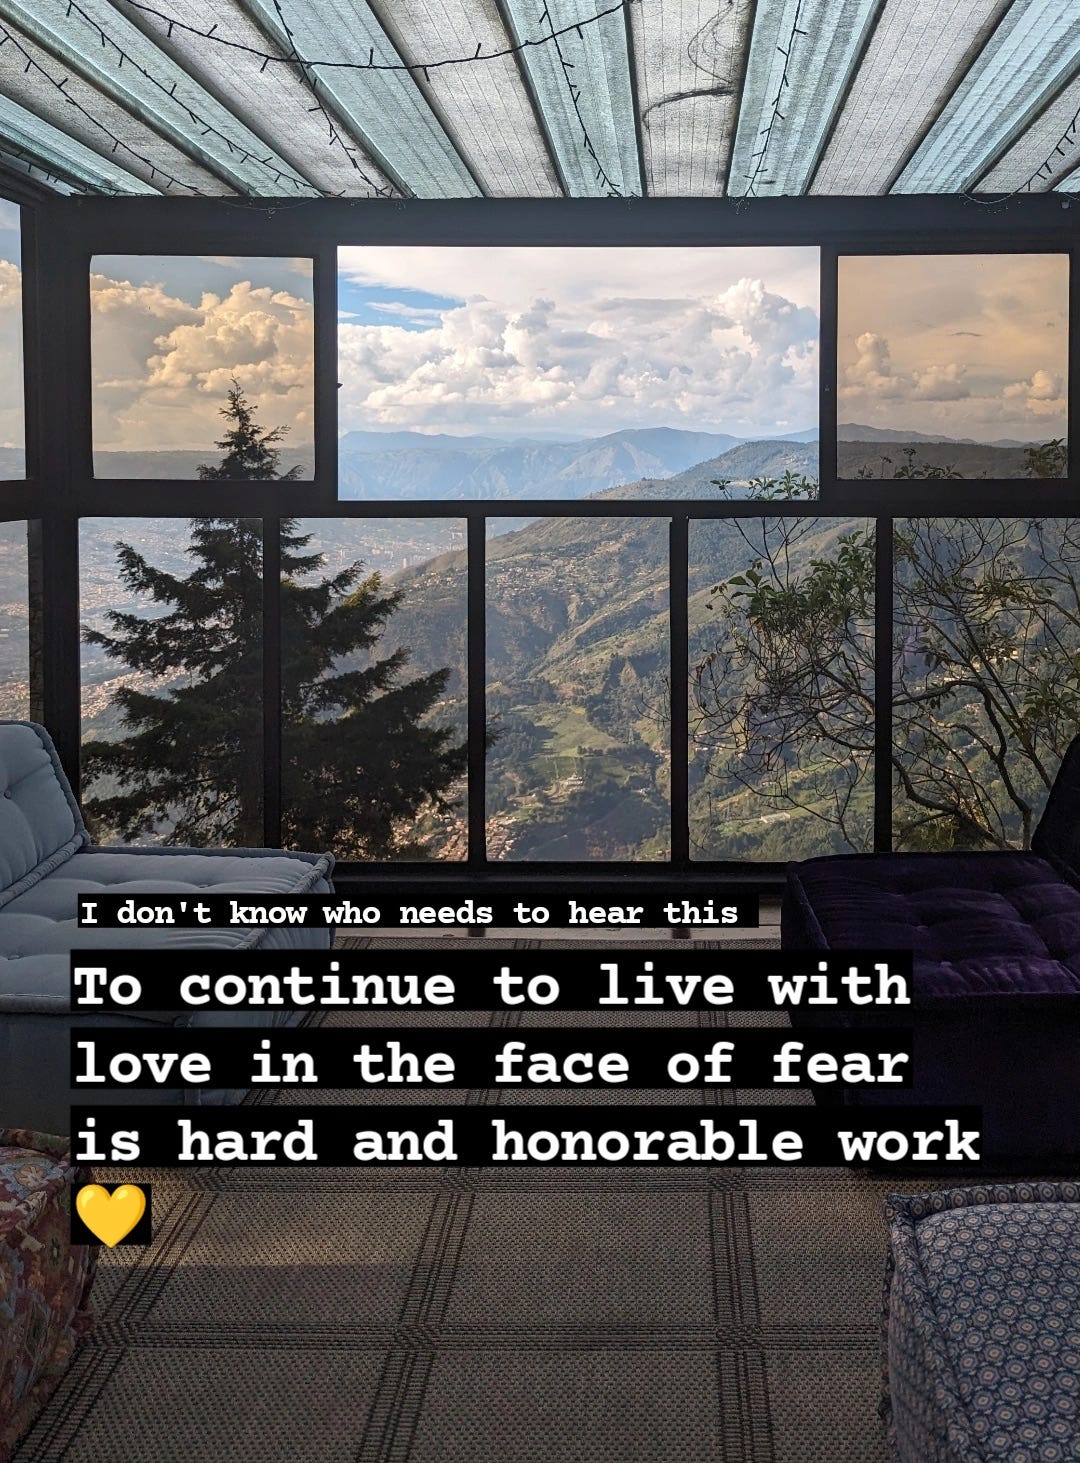 To continue to live with love in the face of fear is hard and honorable work